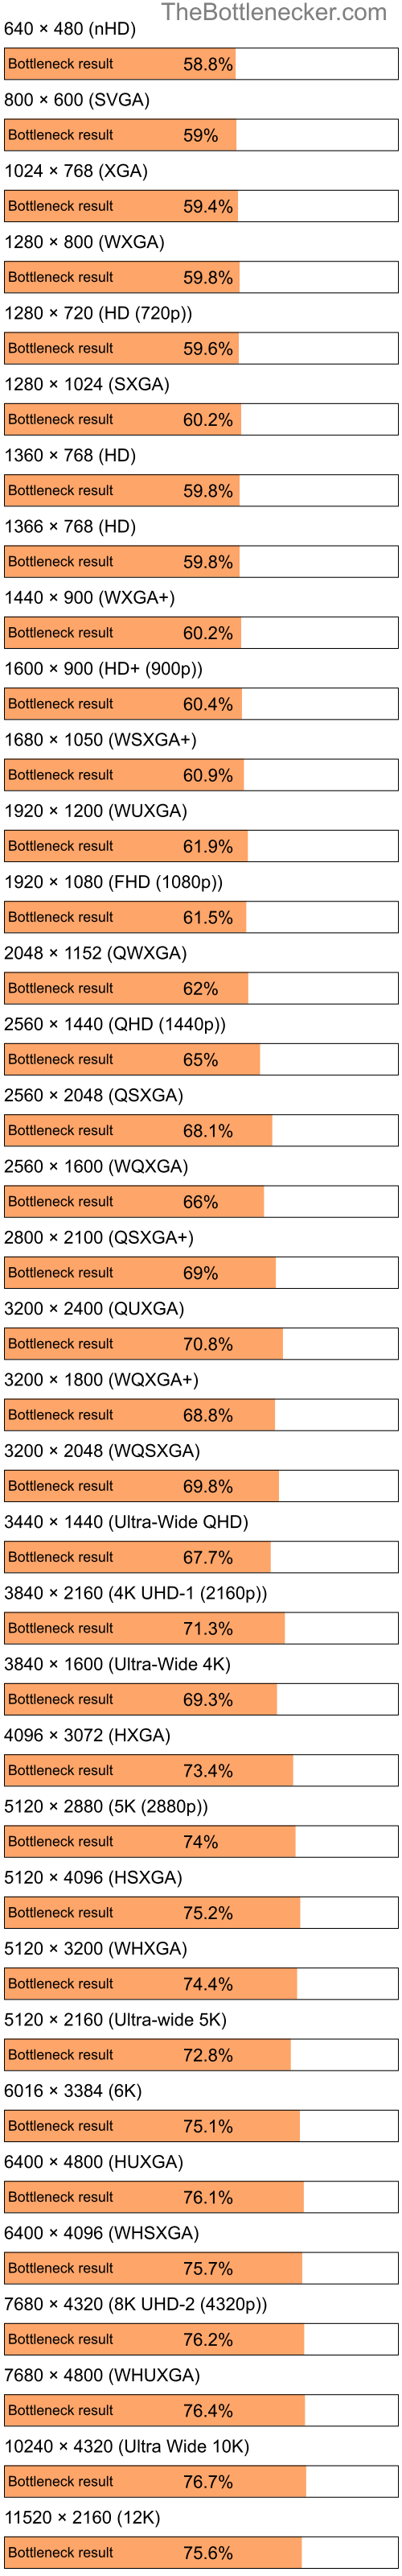 Bottleneck results by resolution for Intel Celeron and AMD Mobility Radeon HD 2400 XT in General Tasks